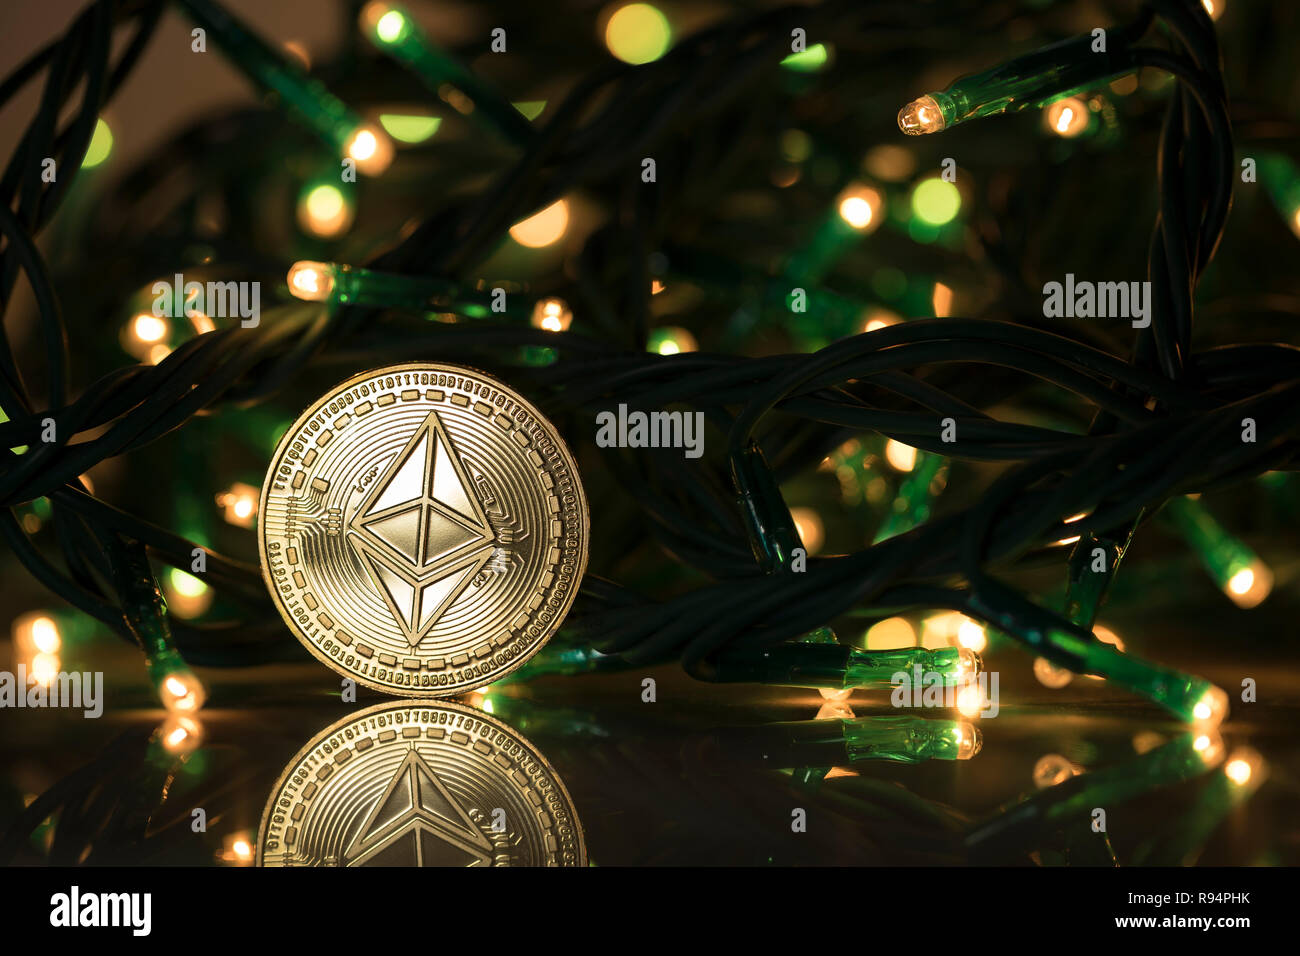 Ethereum classic physical coin surrounded with Christmas tree lights Stock Photo